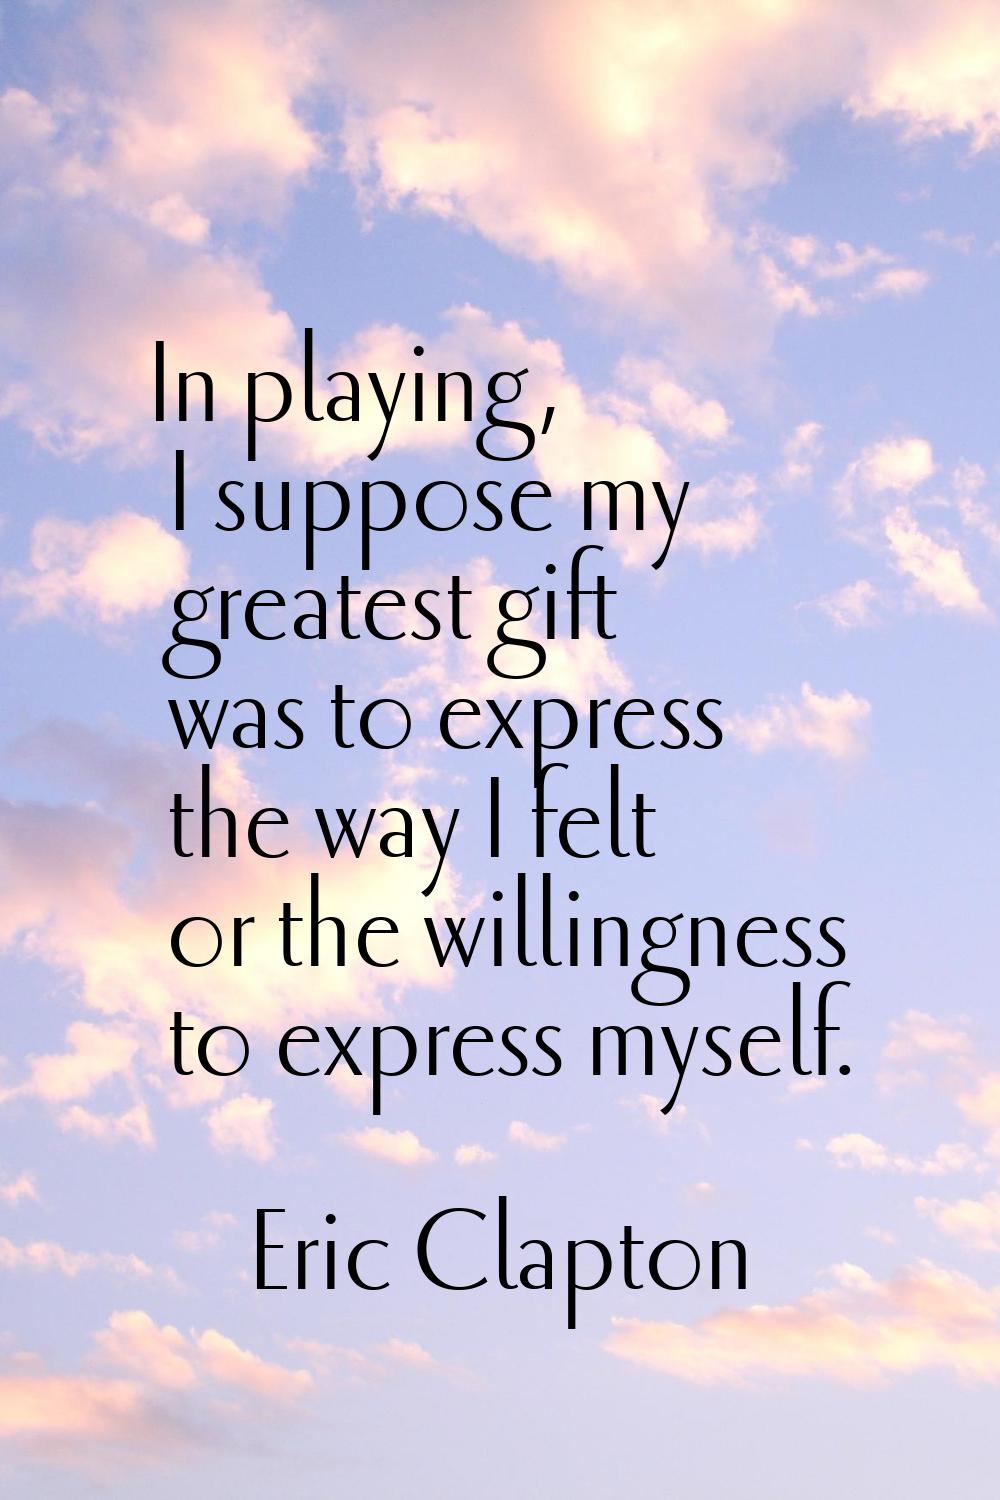 In playing, I suppose my greatest gift was to express the way I felt or the willingness to express 